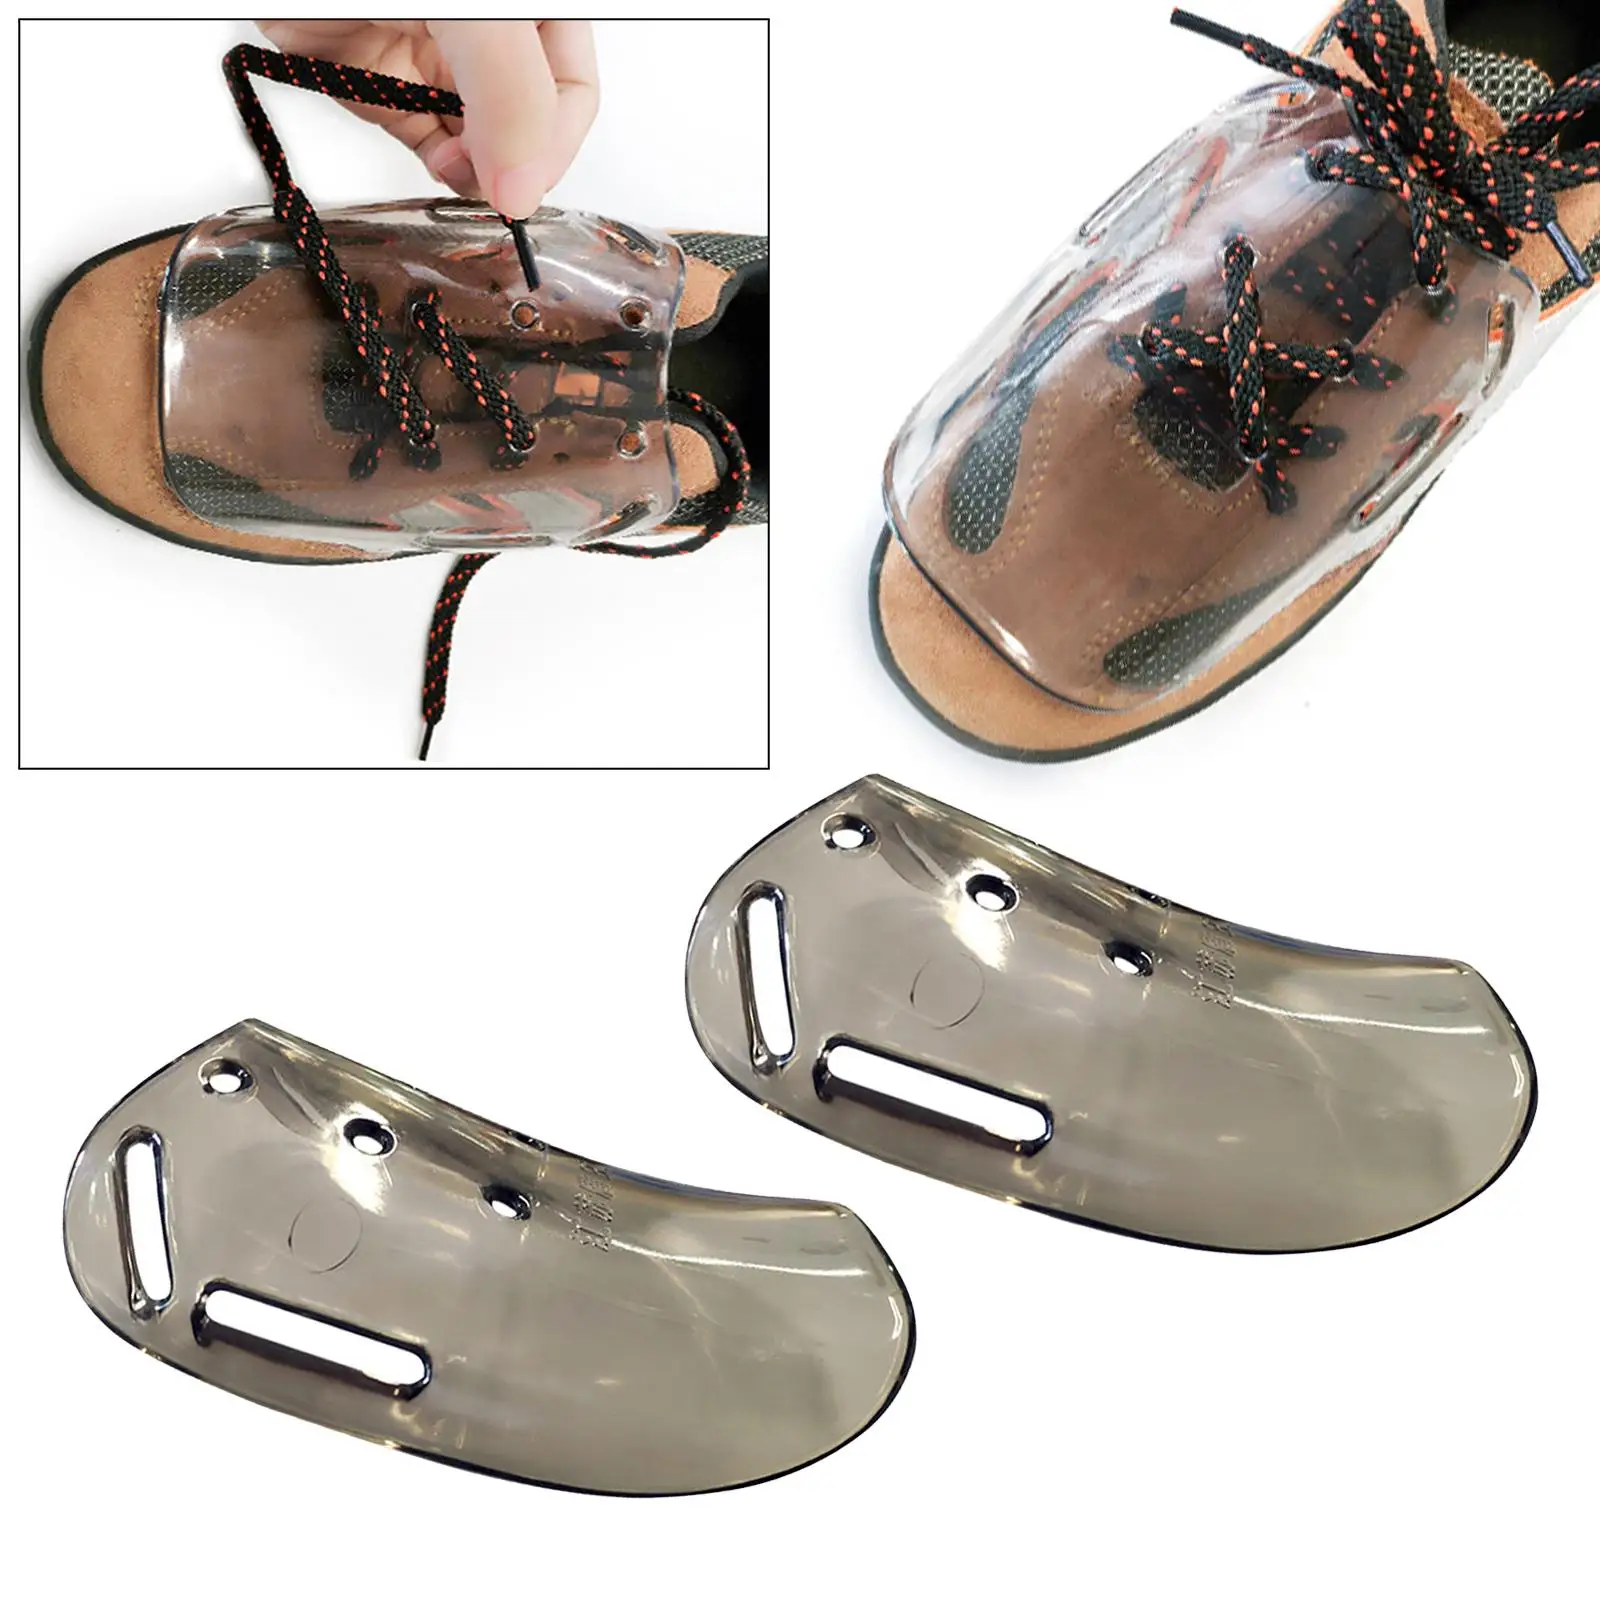 2 Pieces External Metatarsal Guard Safety Protection Heat Insulation ABS Welder Shoe Cover for Automobile Manufacturing Unisex